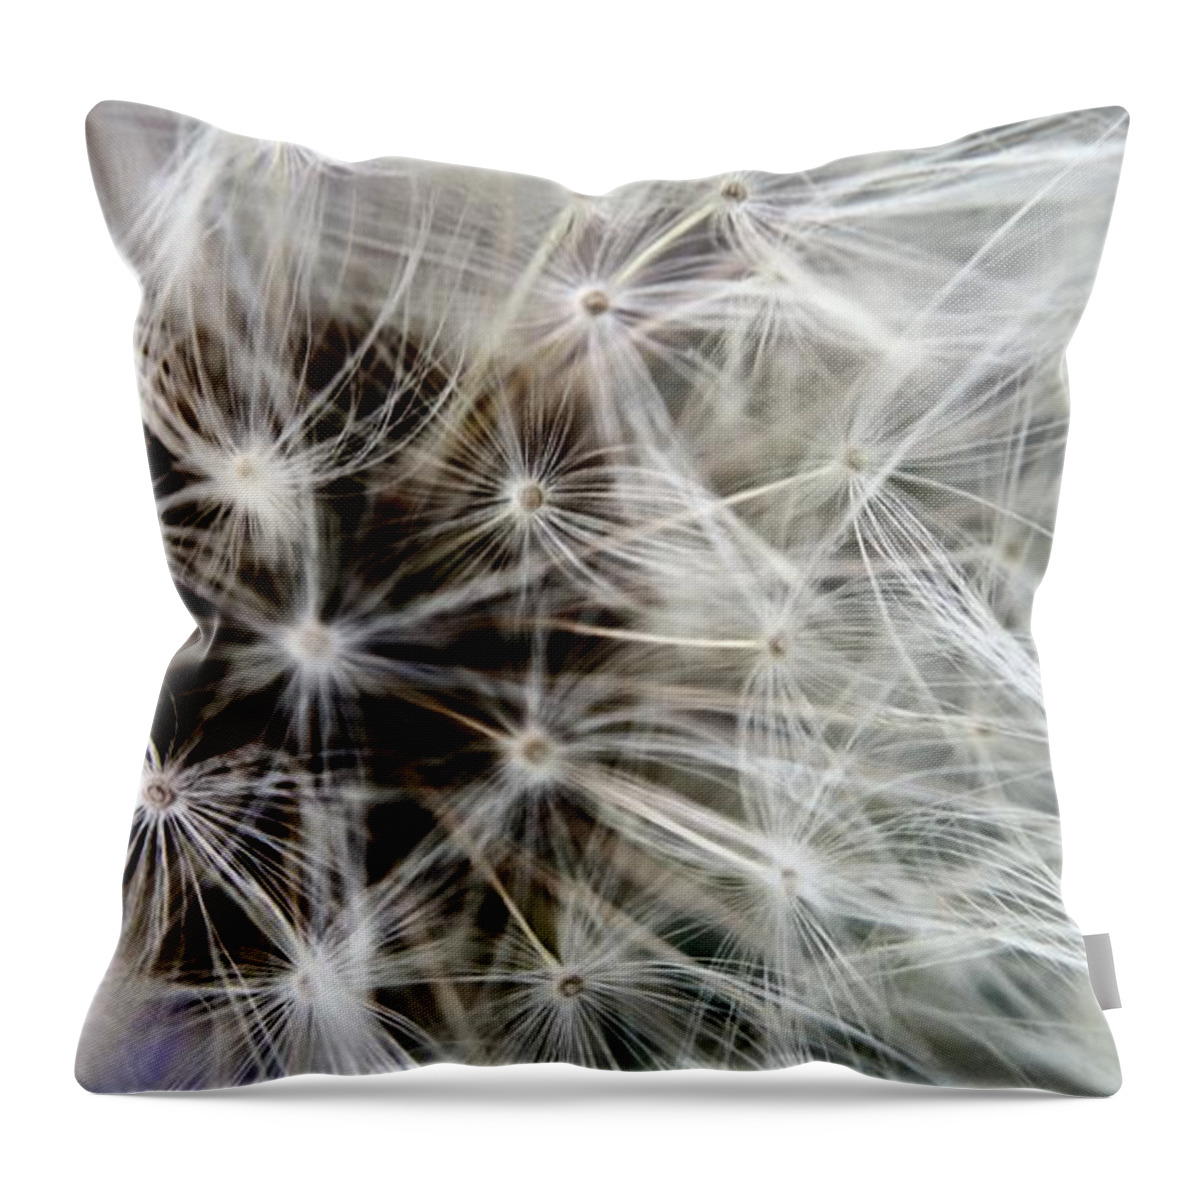 Wildflower Throw Pillow featuring the photograph Wildflower 1 by Belinda Cox